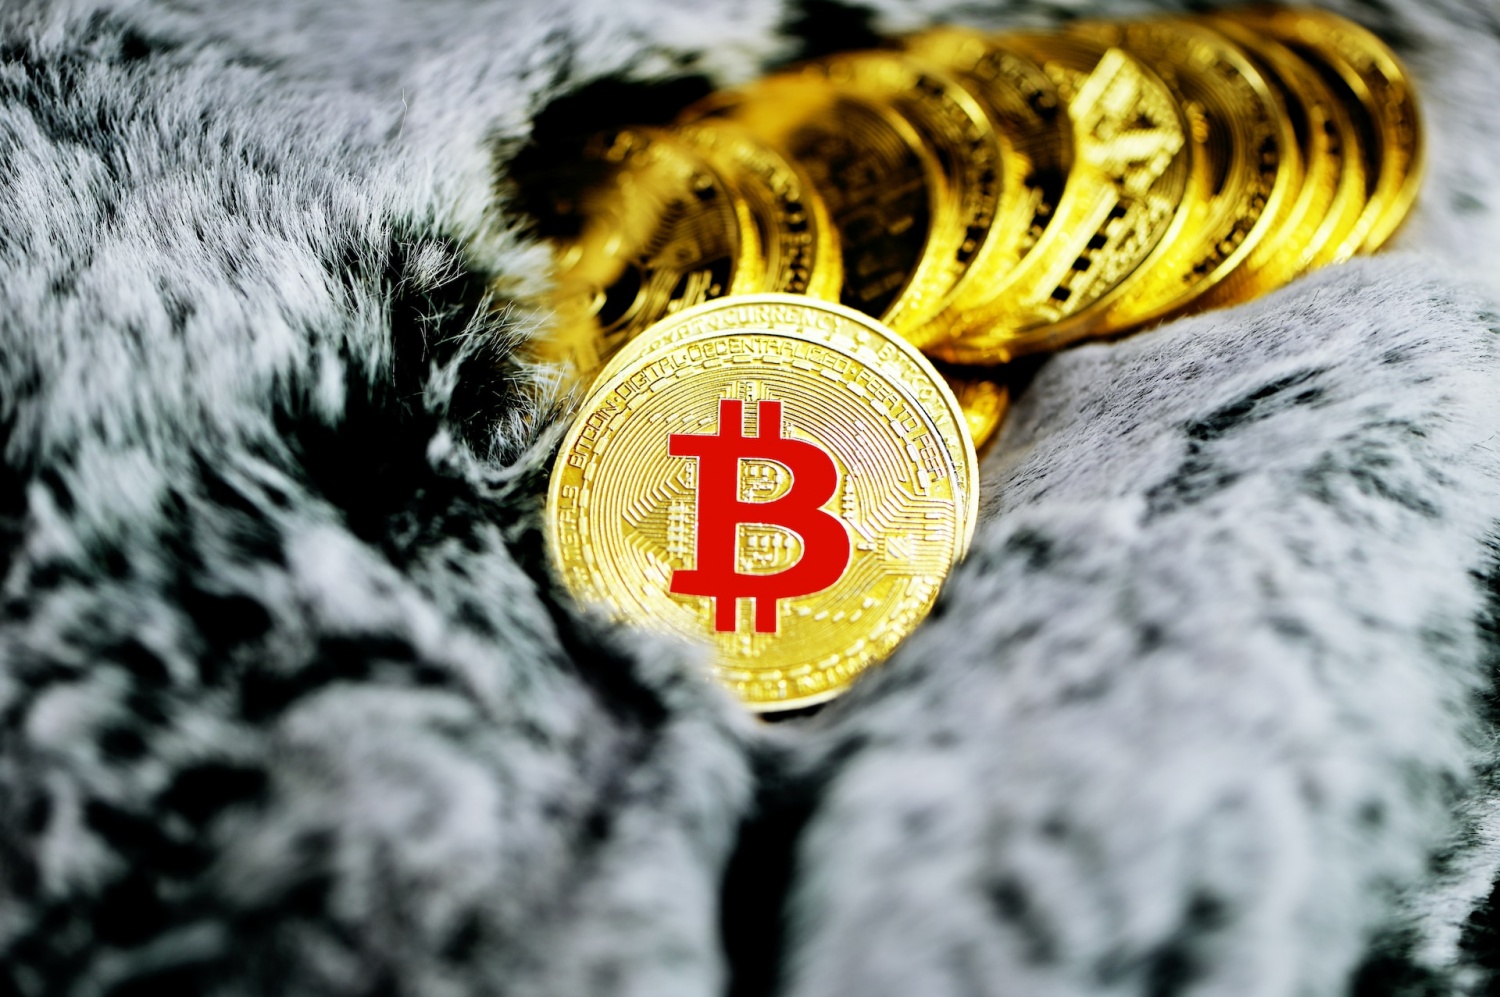 A pile of Bitcoin lays neatly on a fur surface